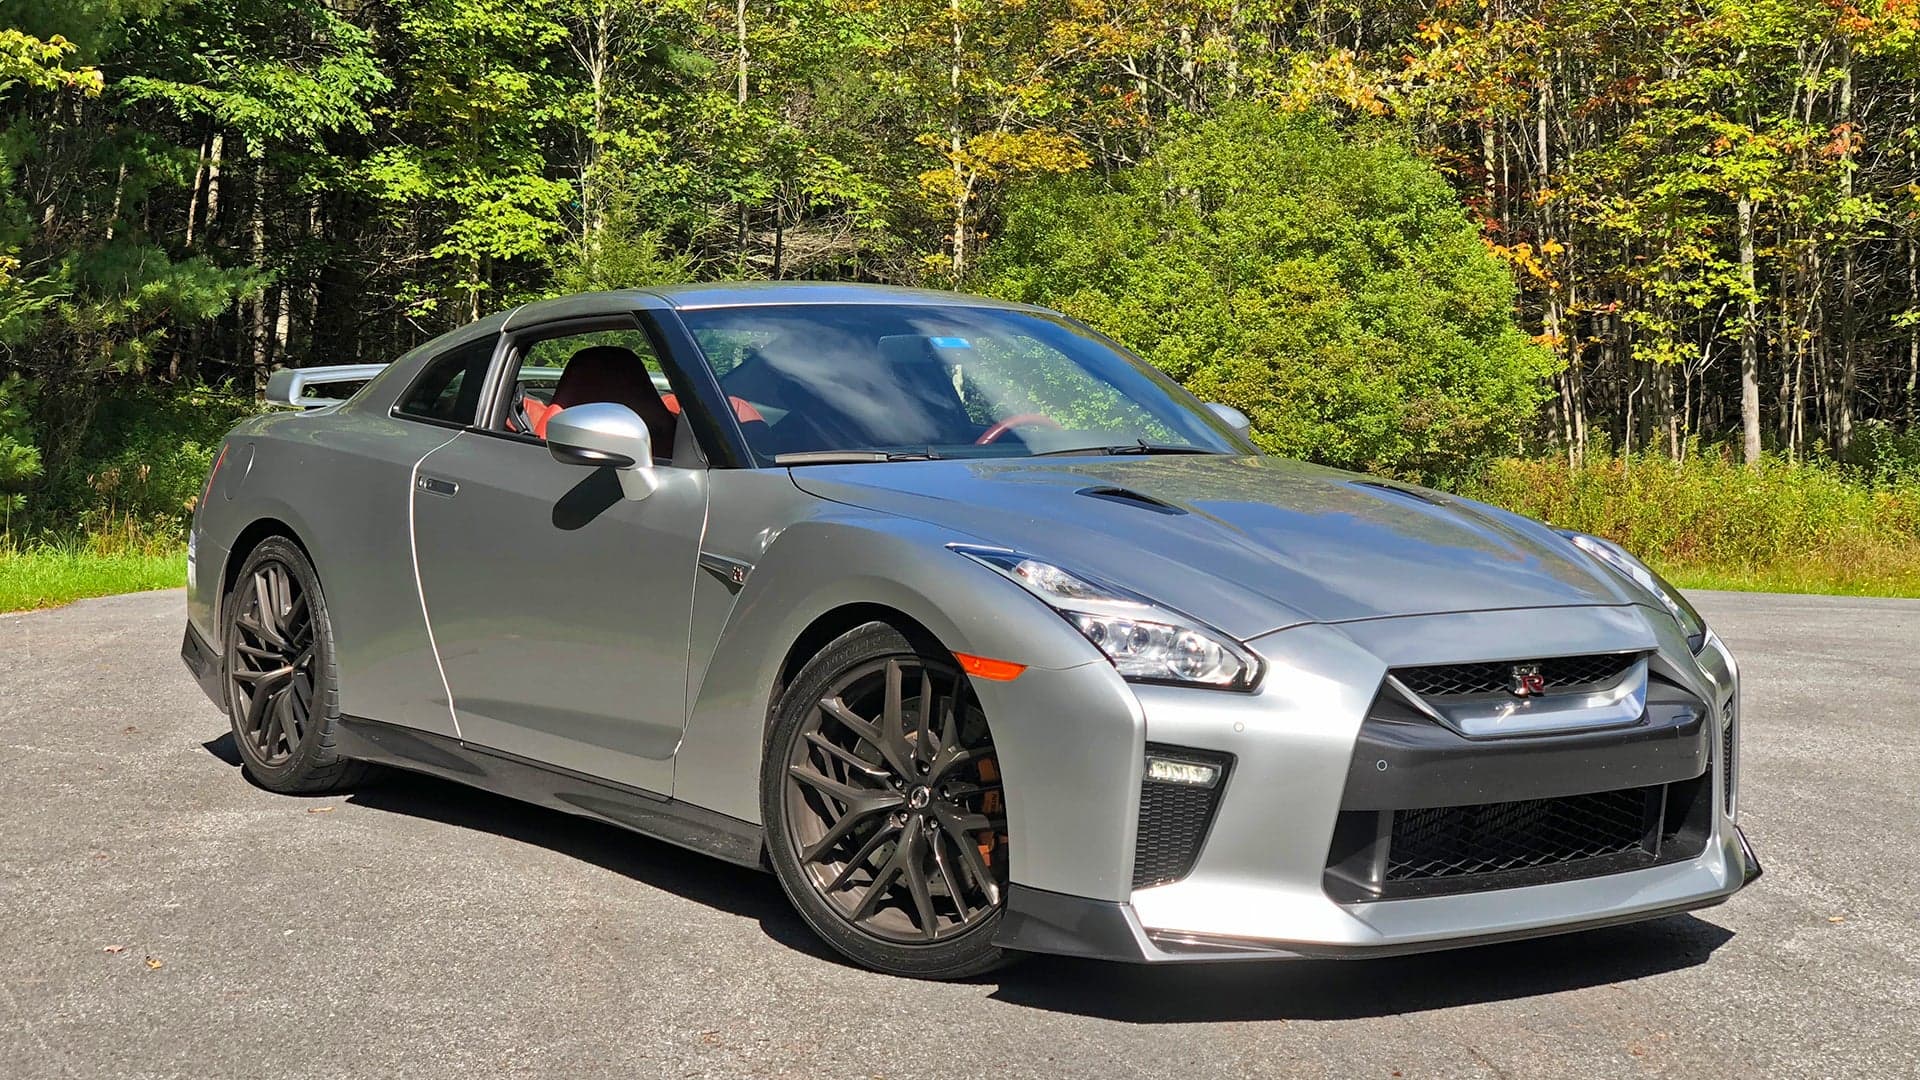 2018 Nissan GT-R Premium Review: Godzilla’s Creaks Can’t Hide This Kaiju’s Power